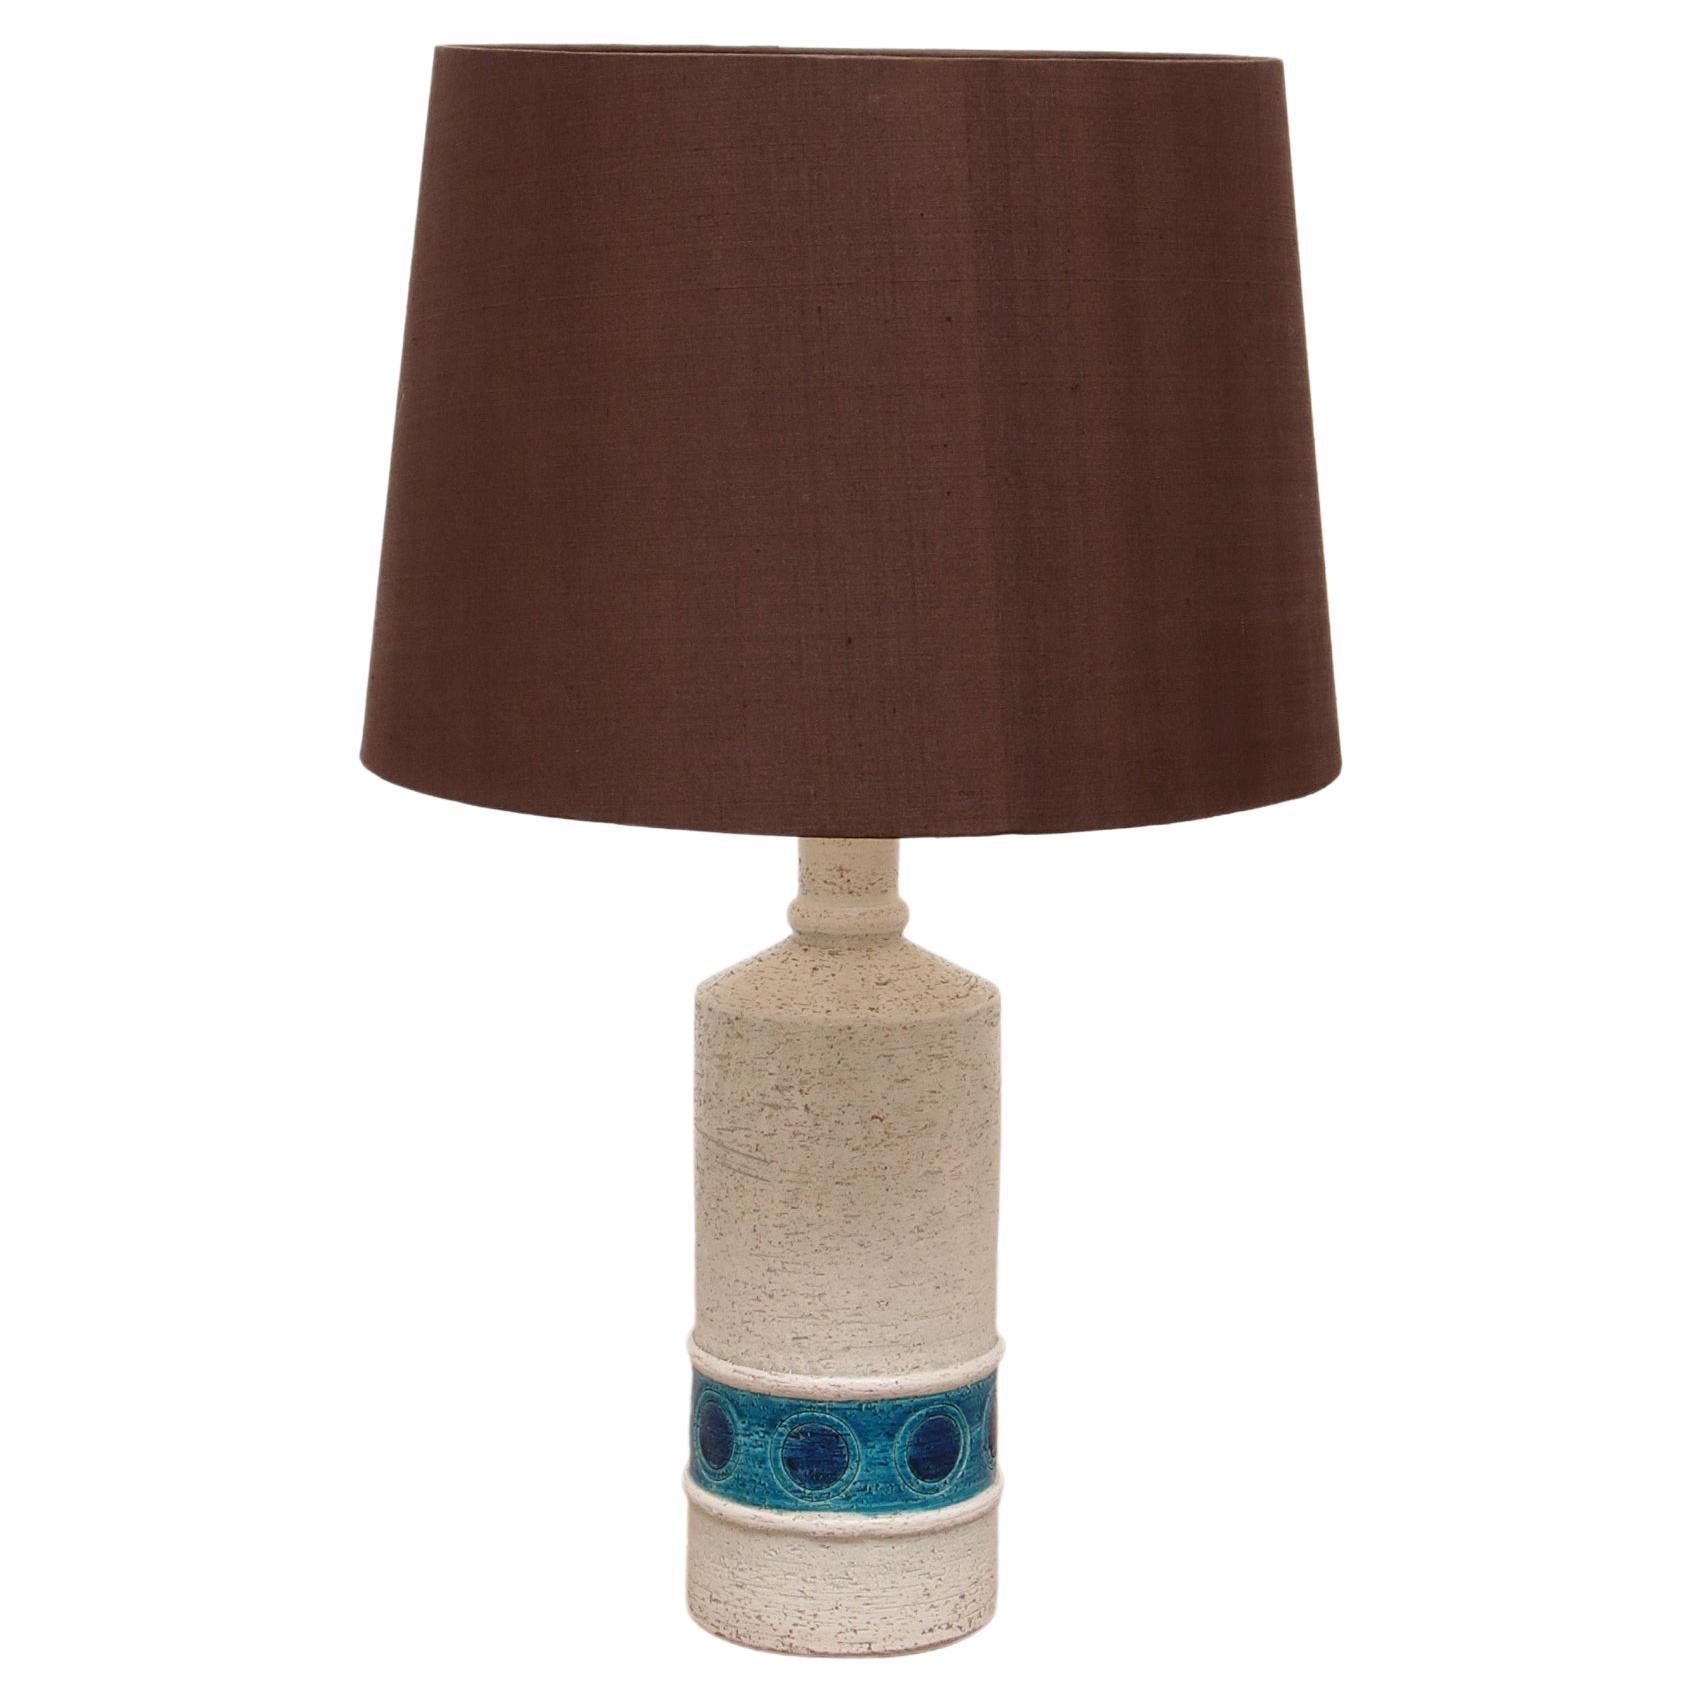 Table Lamp Made of Ceramic Design by Aldo Londi by Bergboms, 1960s For Sale